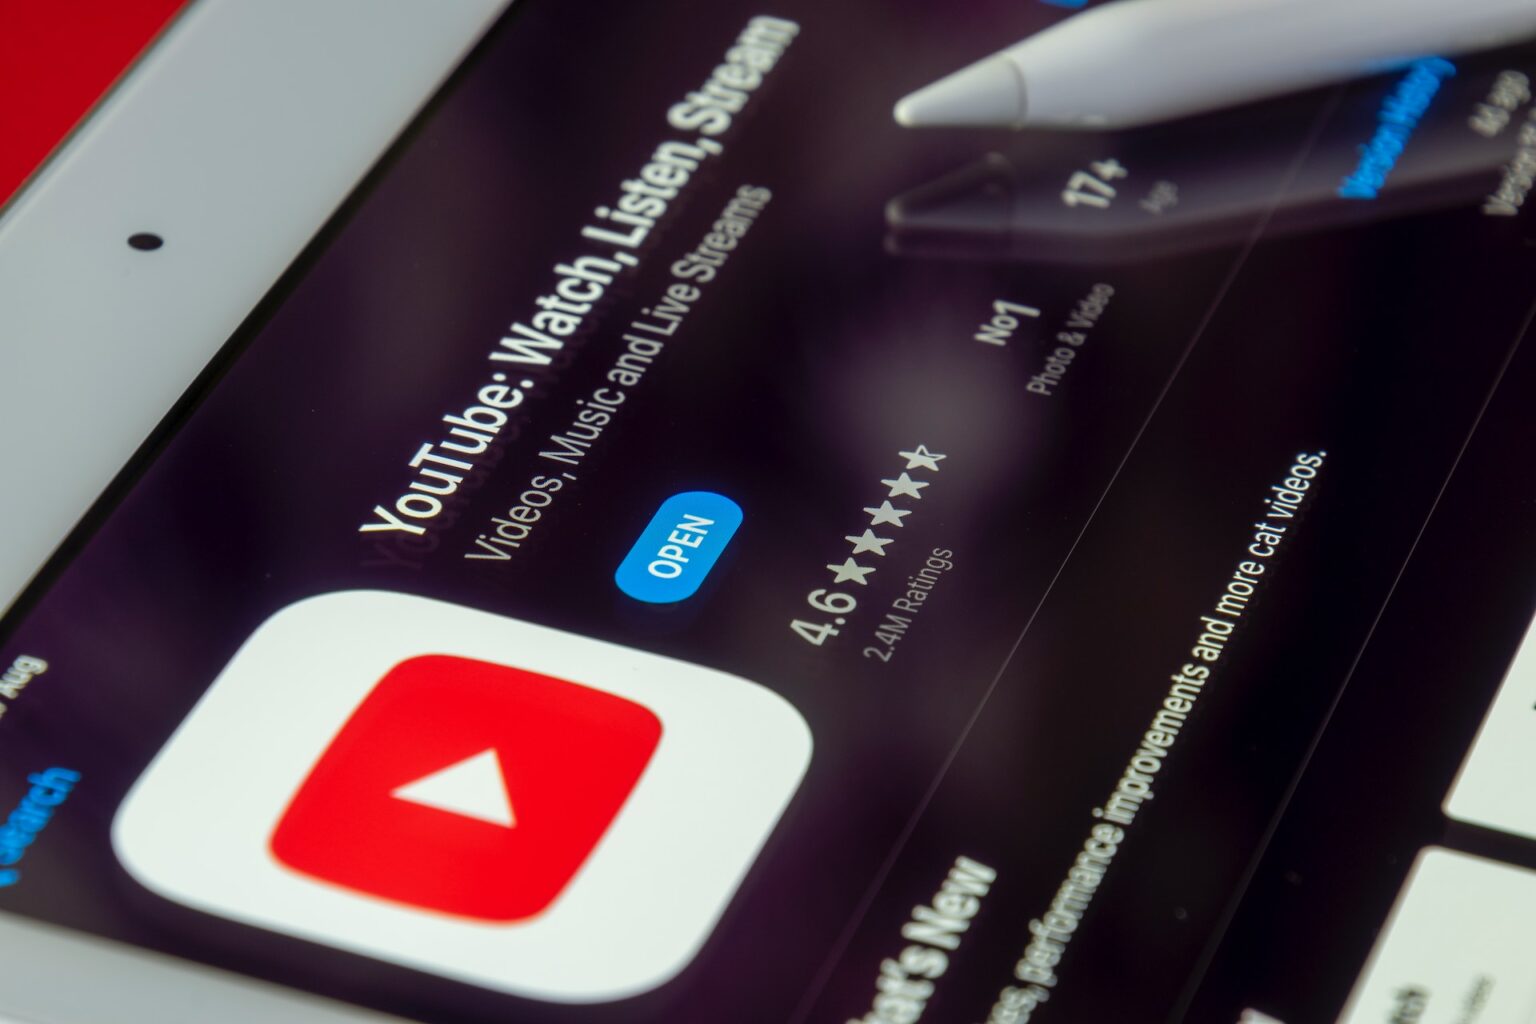 "Learn everything you need to stop ads on YouTube mobile app." Source: Unsplash